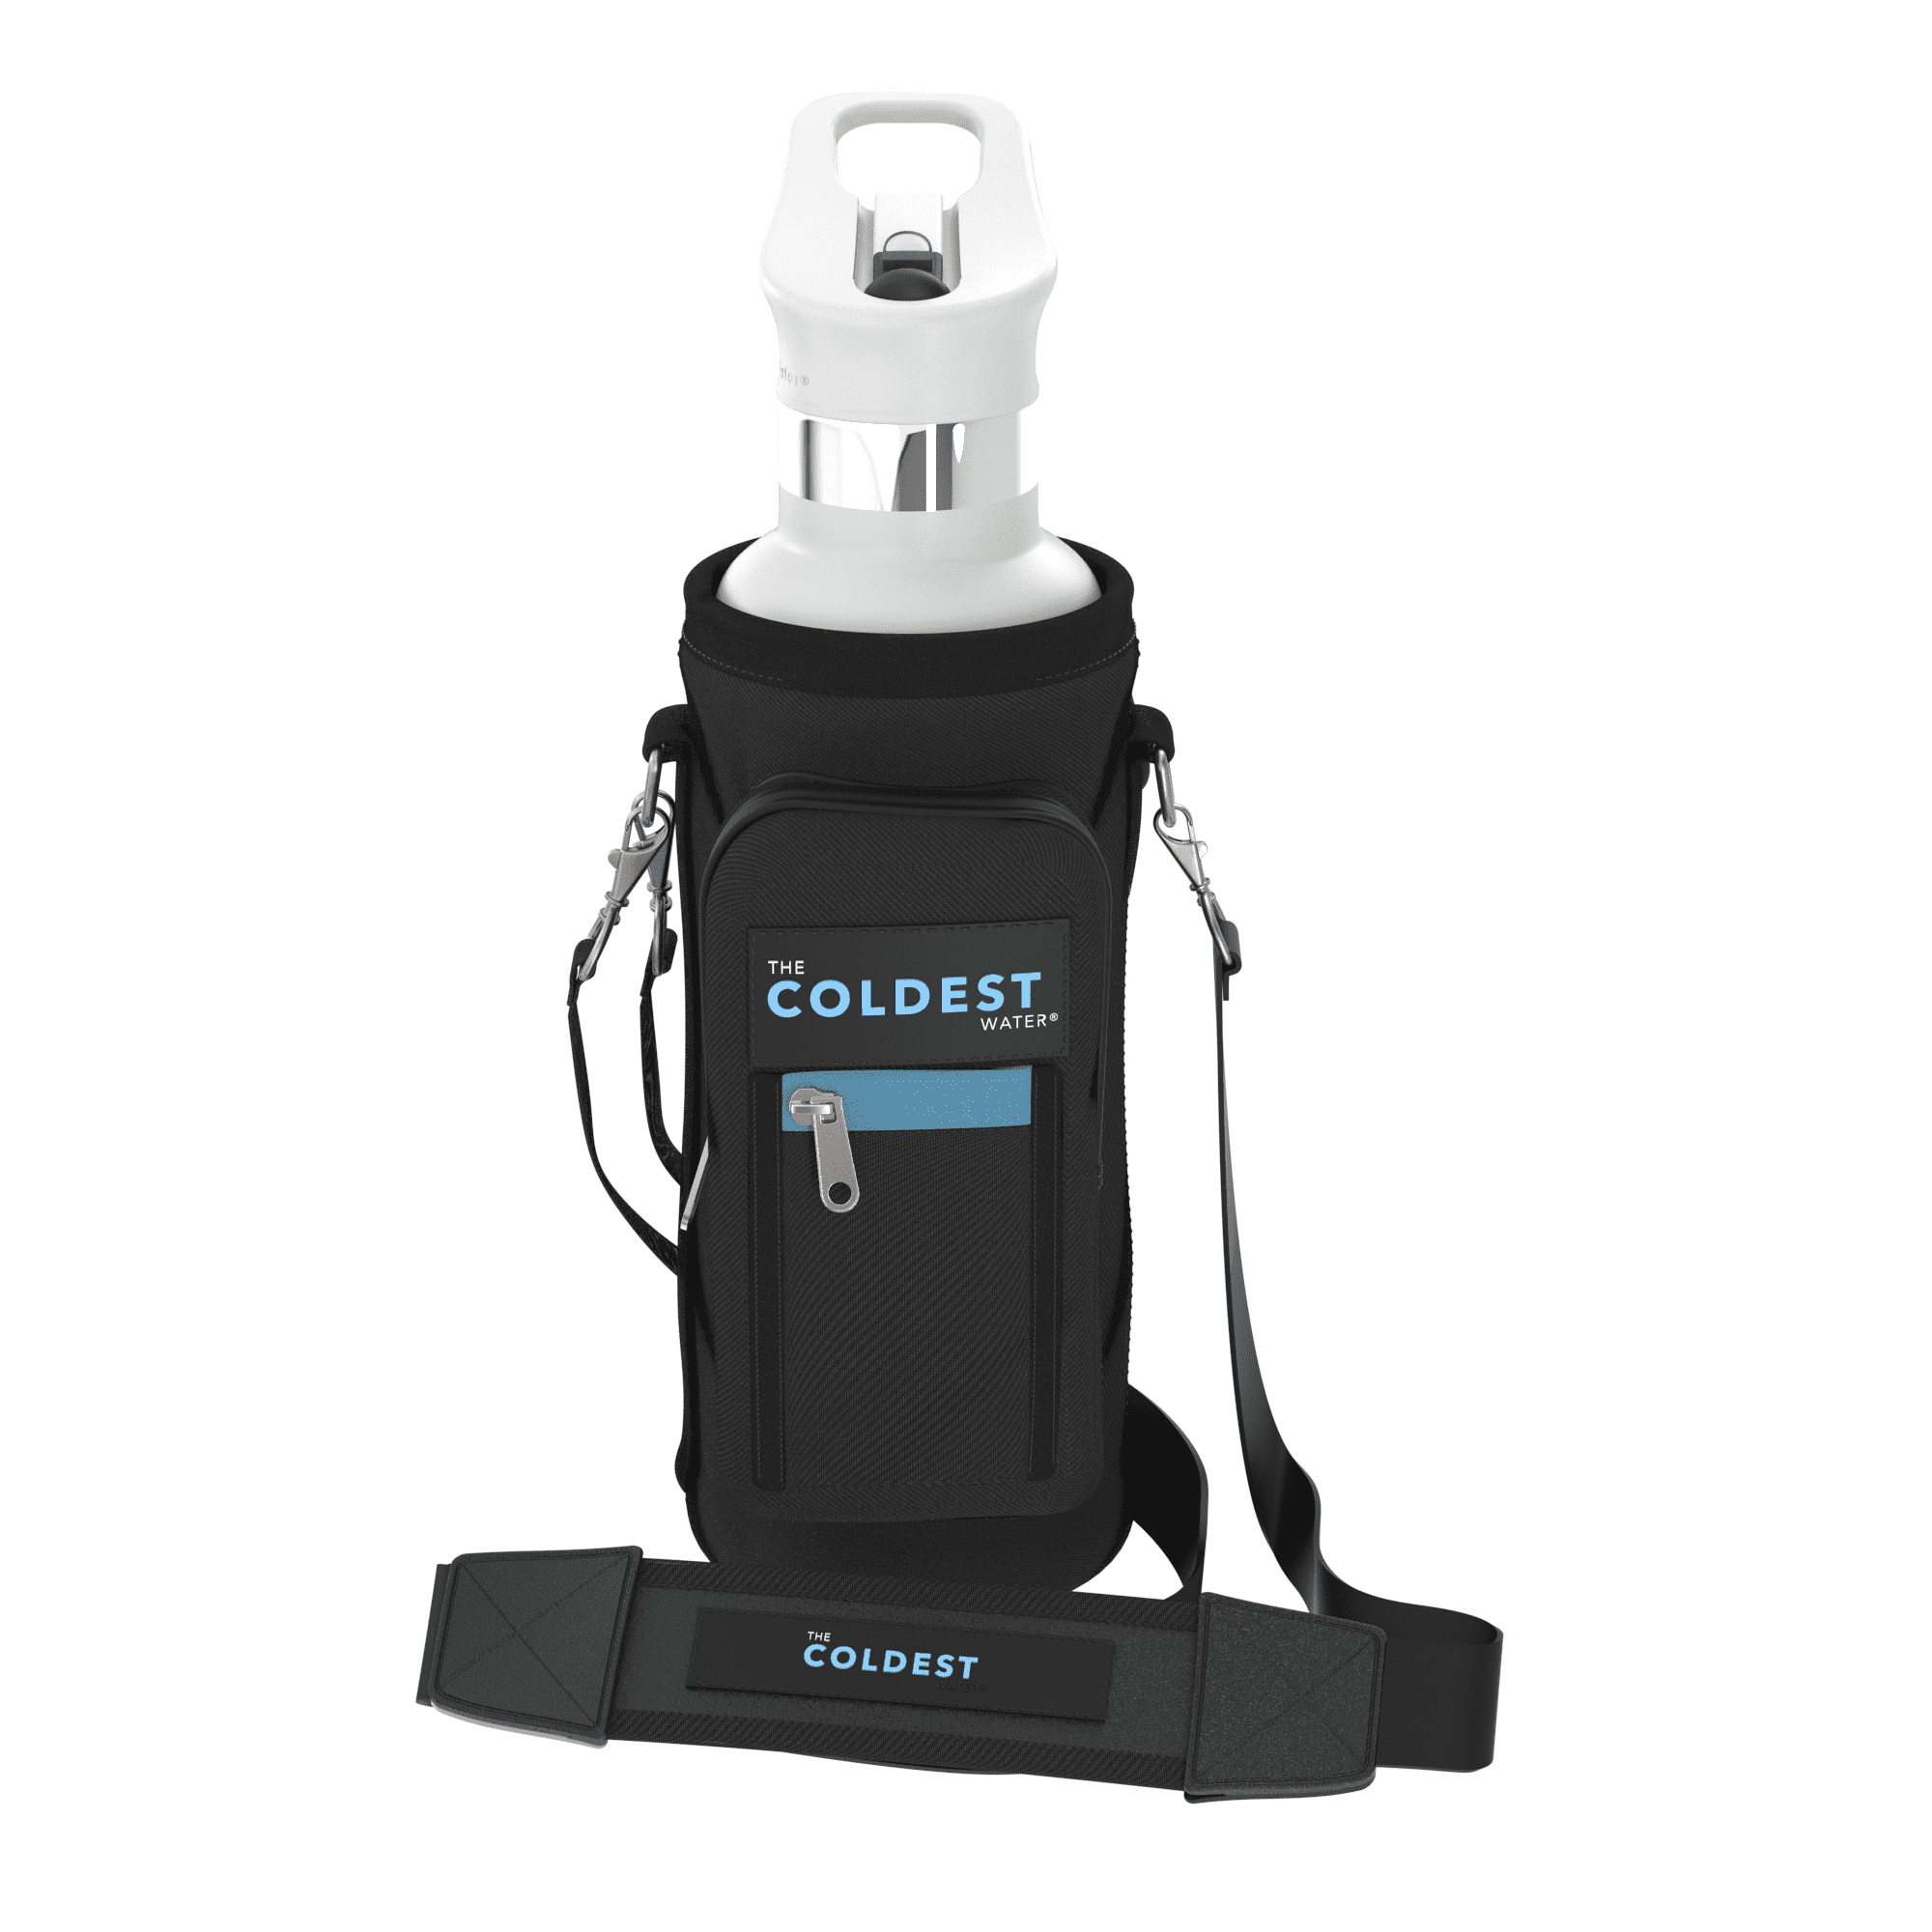 Water Bottle Holder with Strap Pouch and Handle fits Compatible